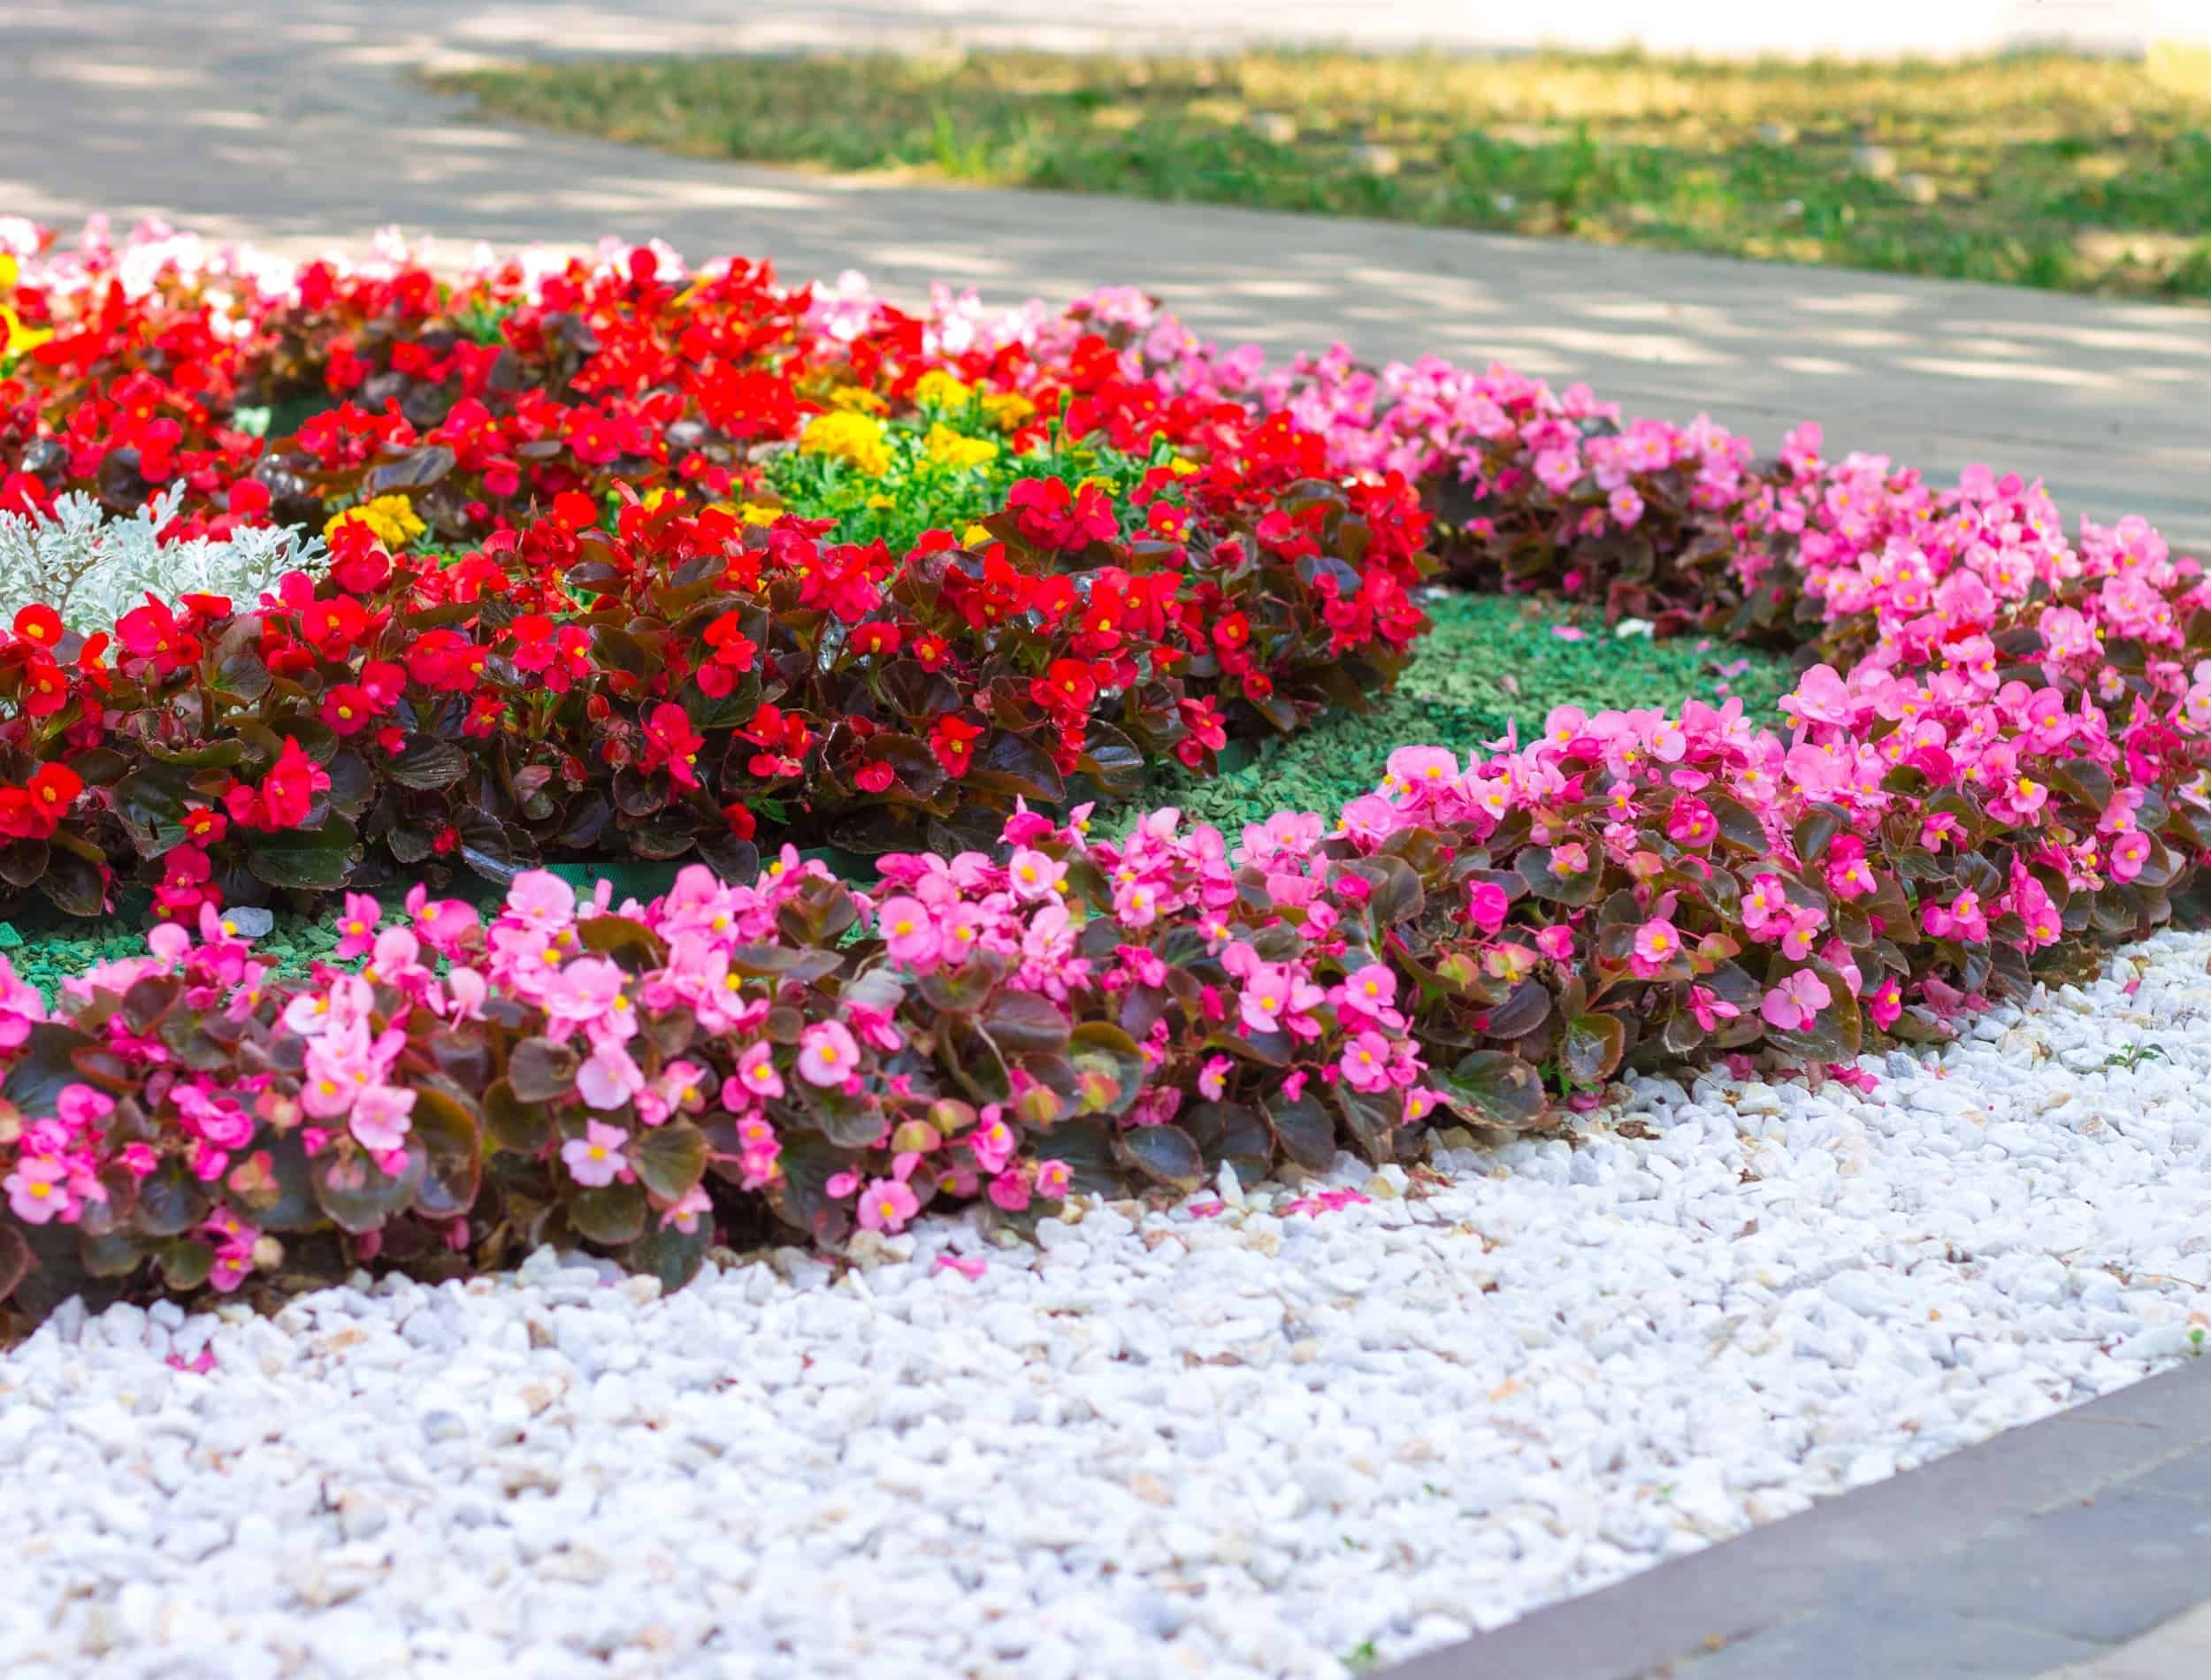 A flower bed of flowers in the city park. Red and pink begonia and marigold with artificial decorative white stone, landscape design